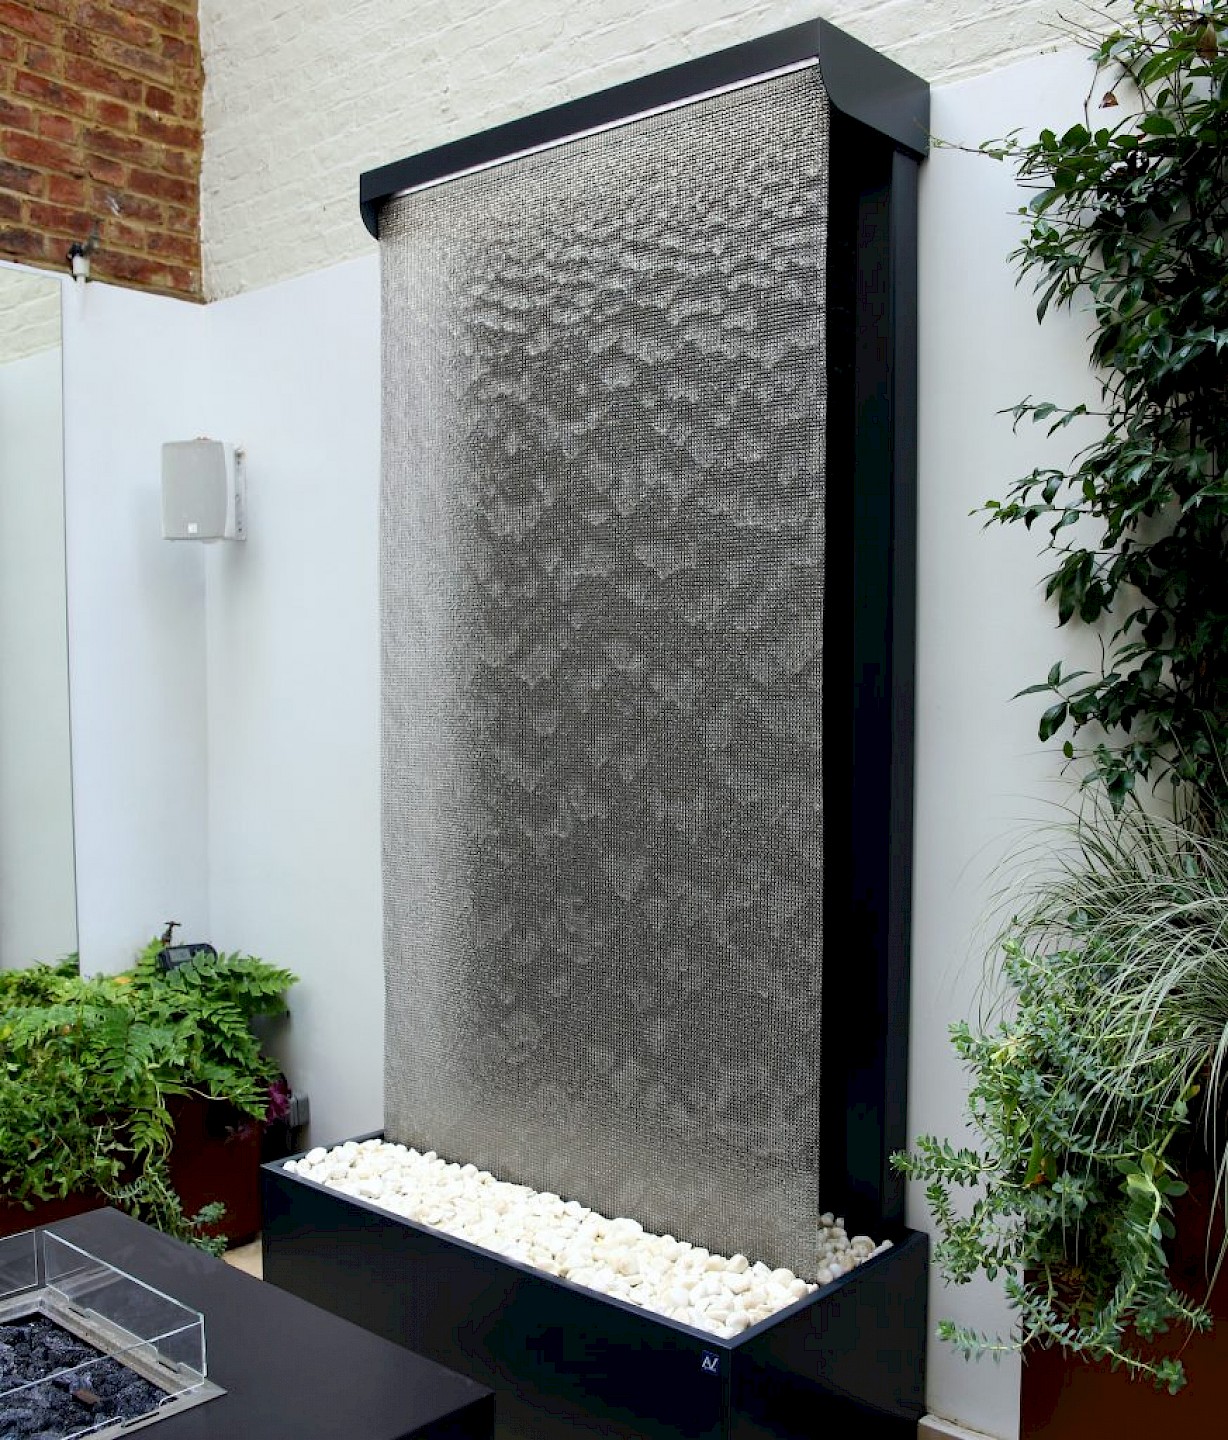 The Enigma Garden Water Wall image